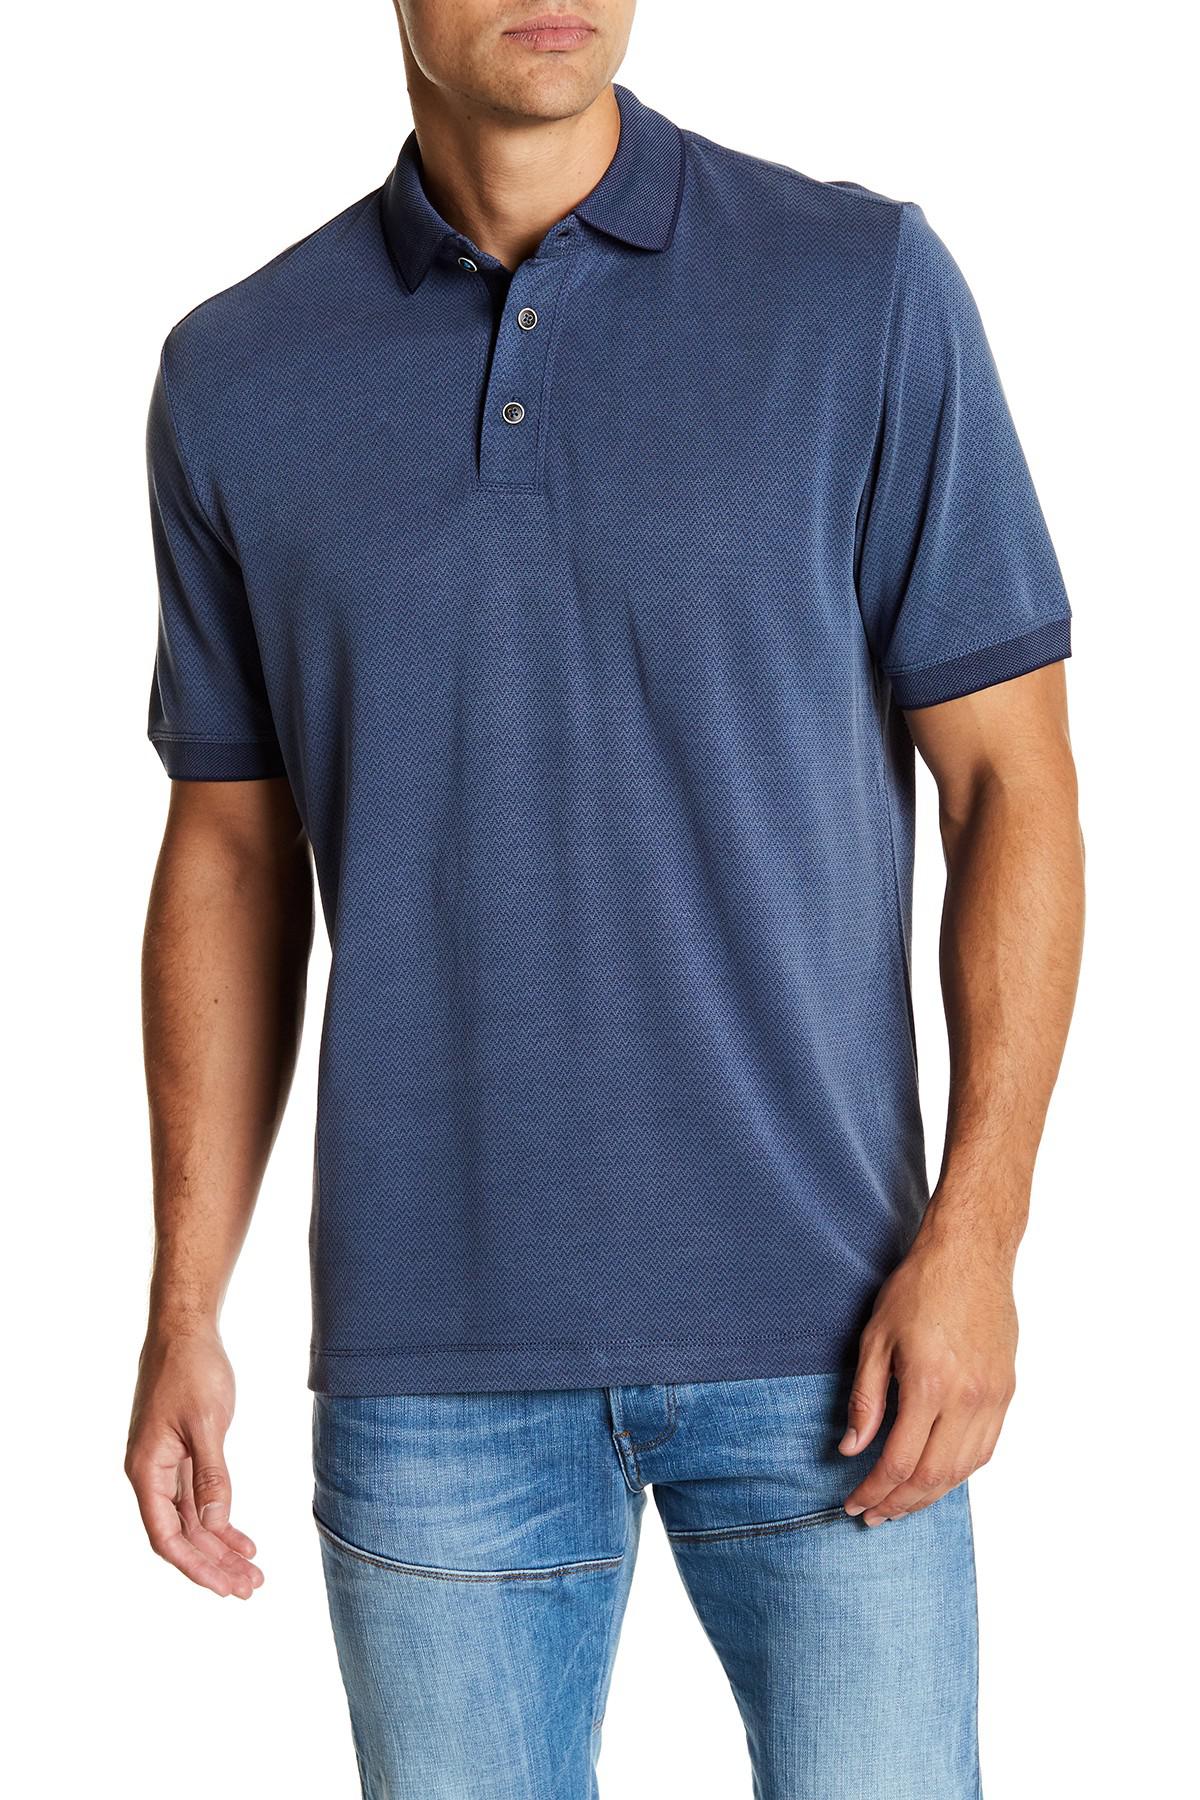 Lyst - Tommy Bahama Paradise Breeze Polo Shirt in Blue for Men